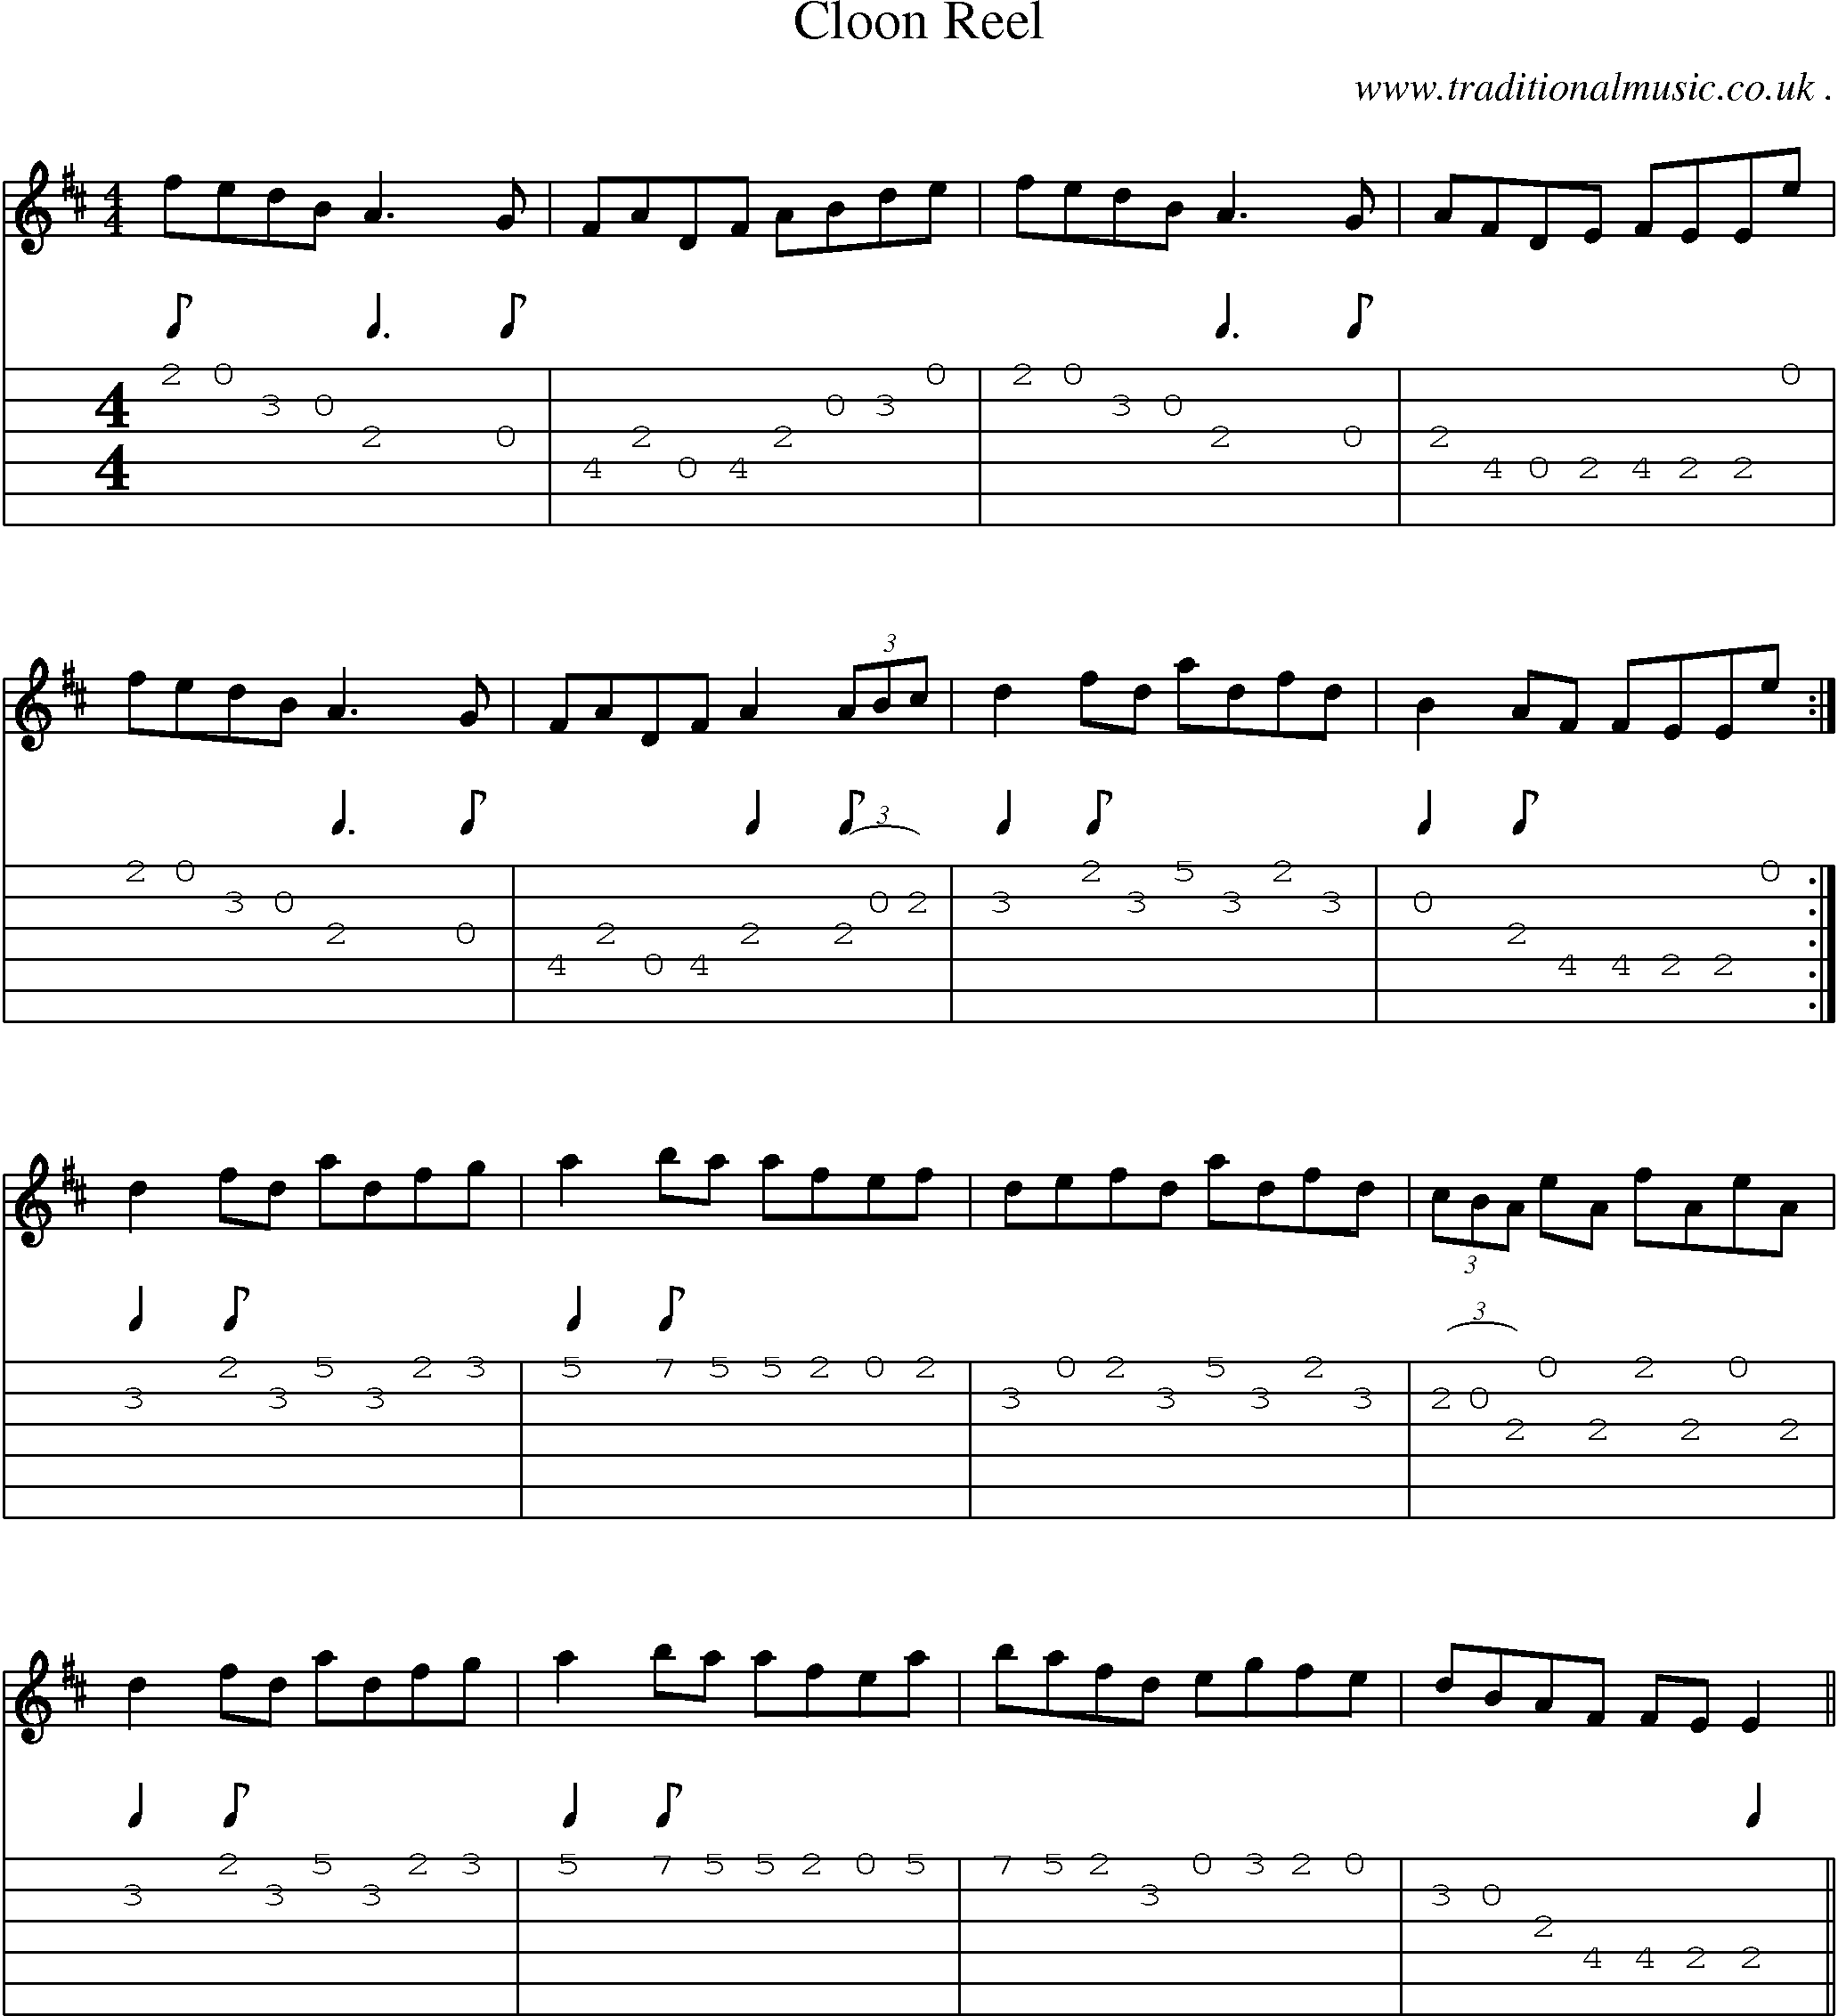 Sheet-Music and Guitar Tabs for Cloon Reel